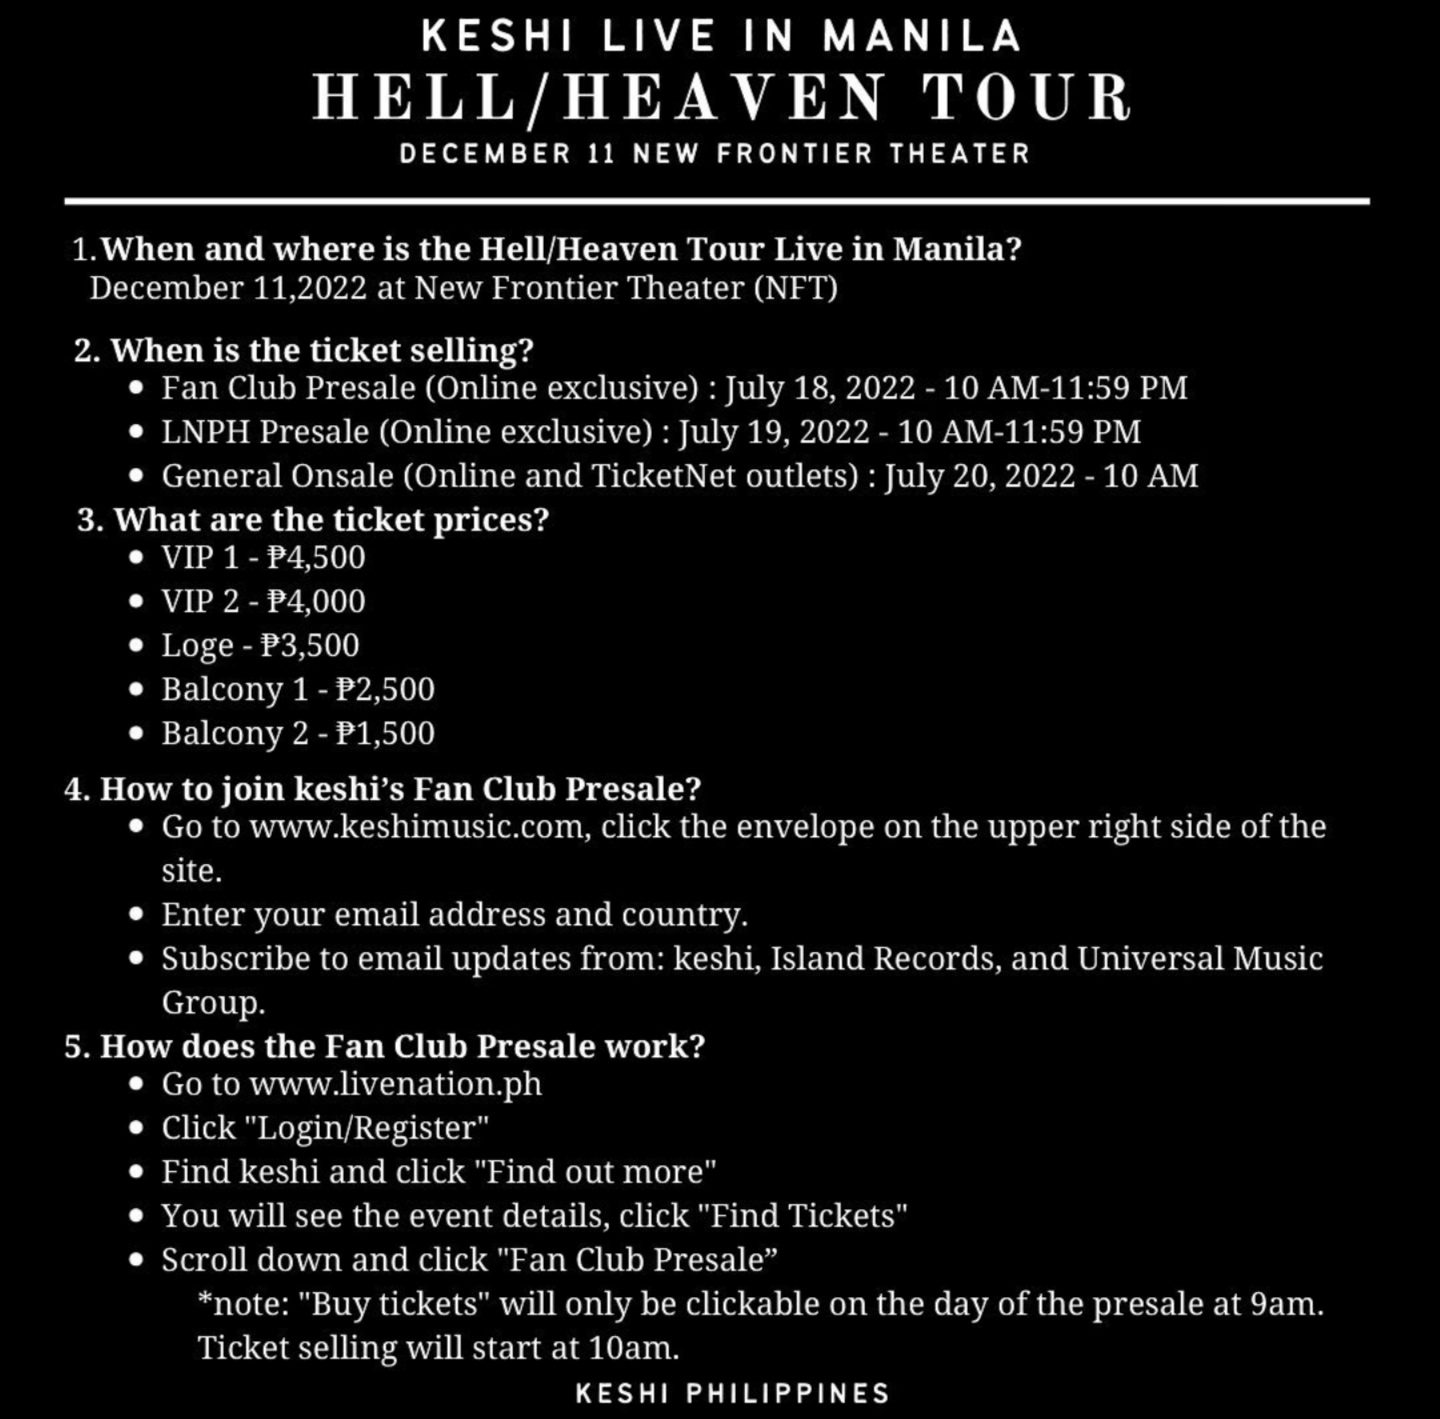 Hell/Heaven Tour keshi live in Manila Philippine Concerts